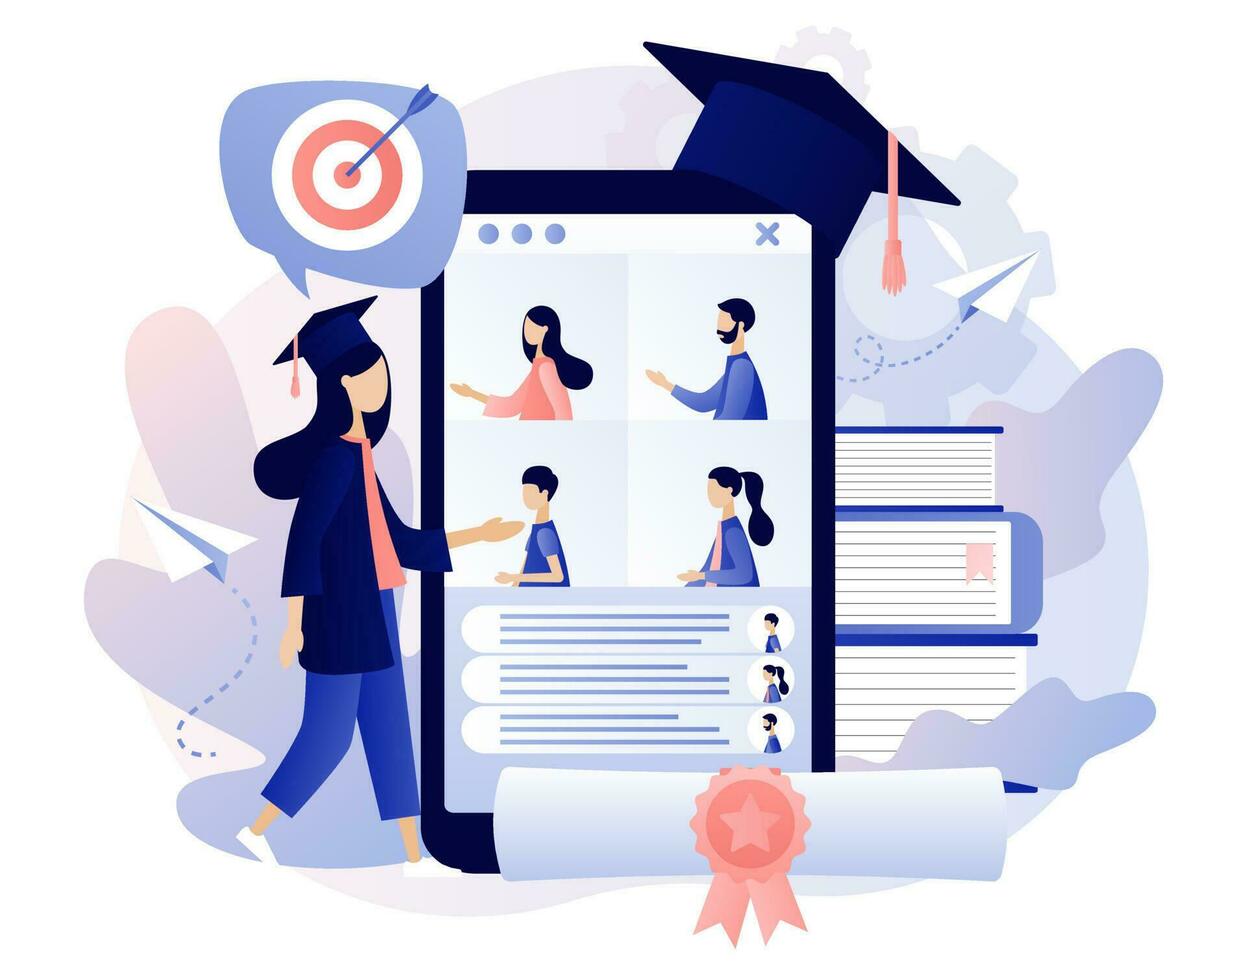 Online graduation. Tiny graduates receive diplomas and communicate via video in smartphone. Online education at social distancing. Modern flat cartoon style. Vector illustration on white background